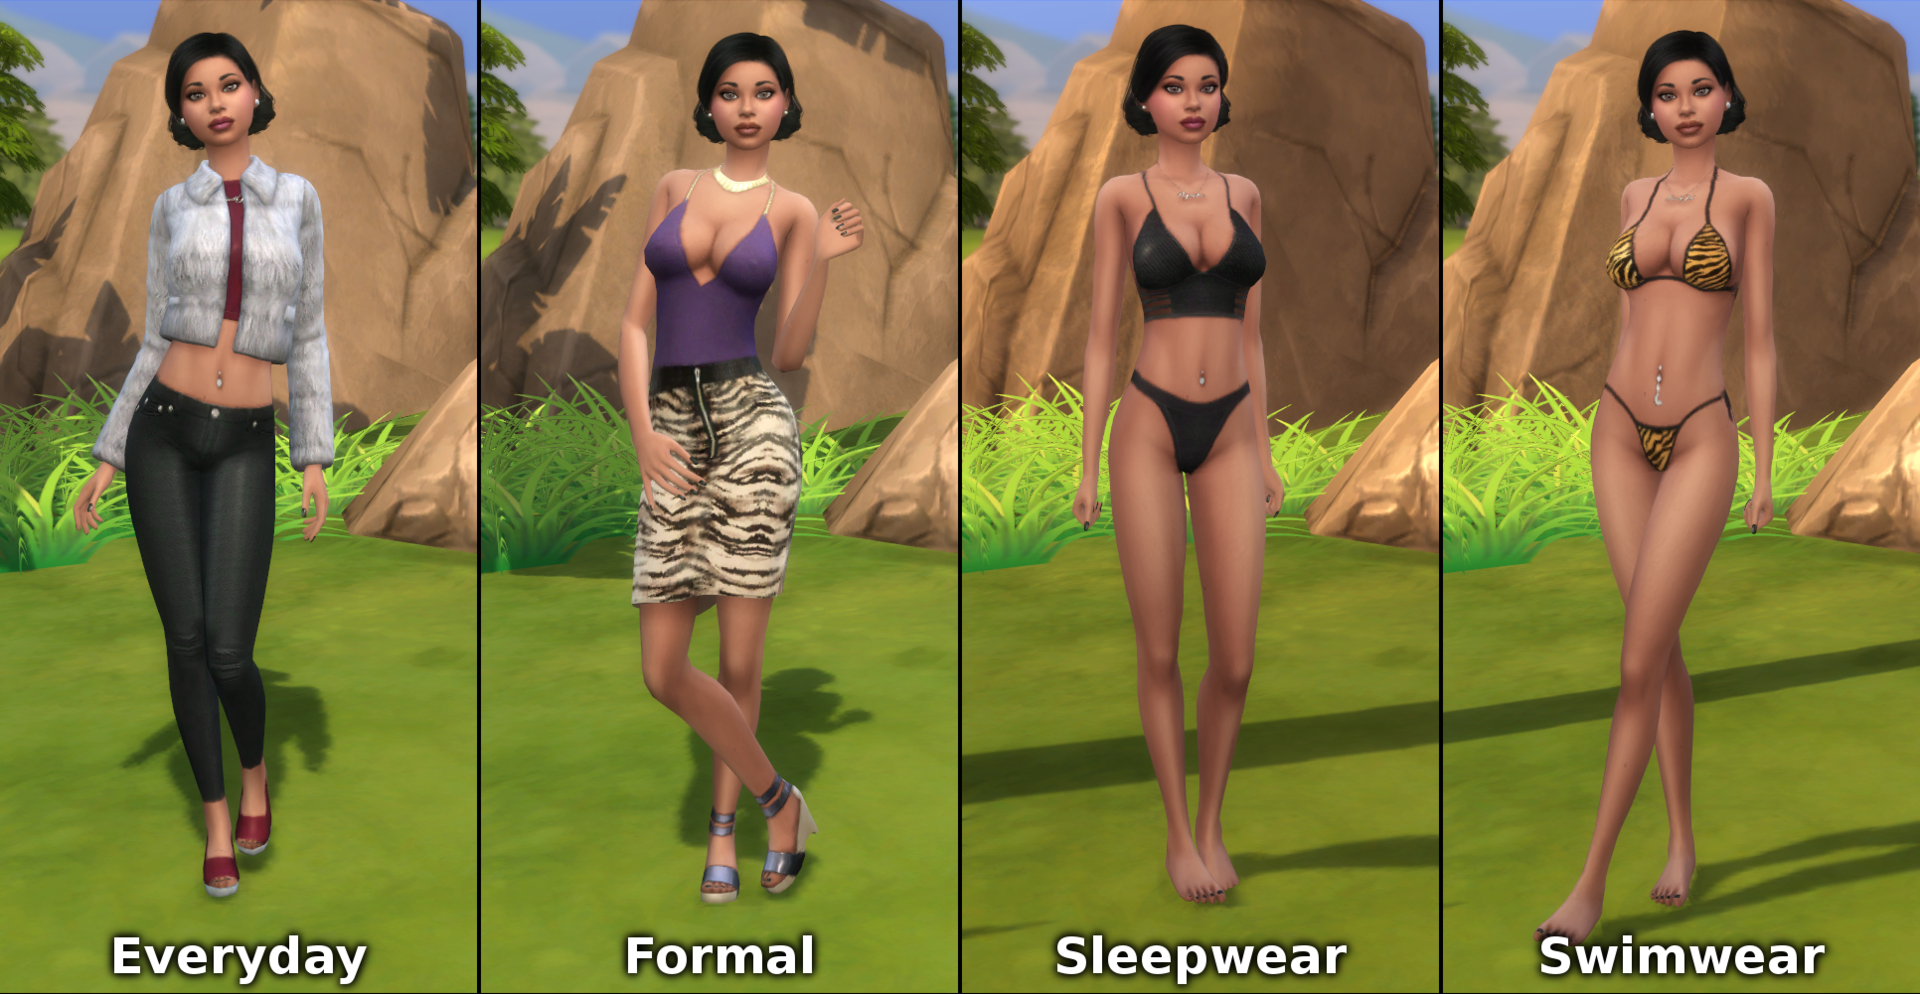 Sims Erplederp S Hot Sims Sexy Sims For Your Whims